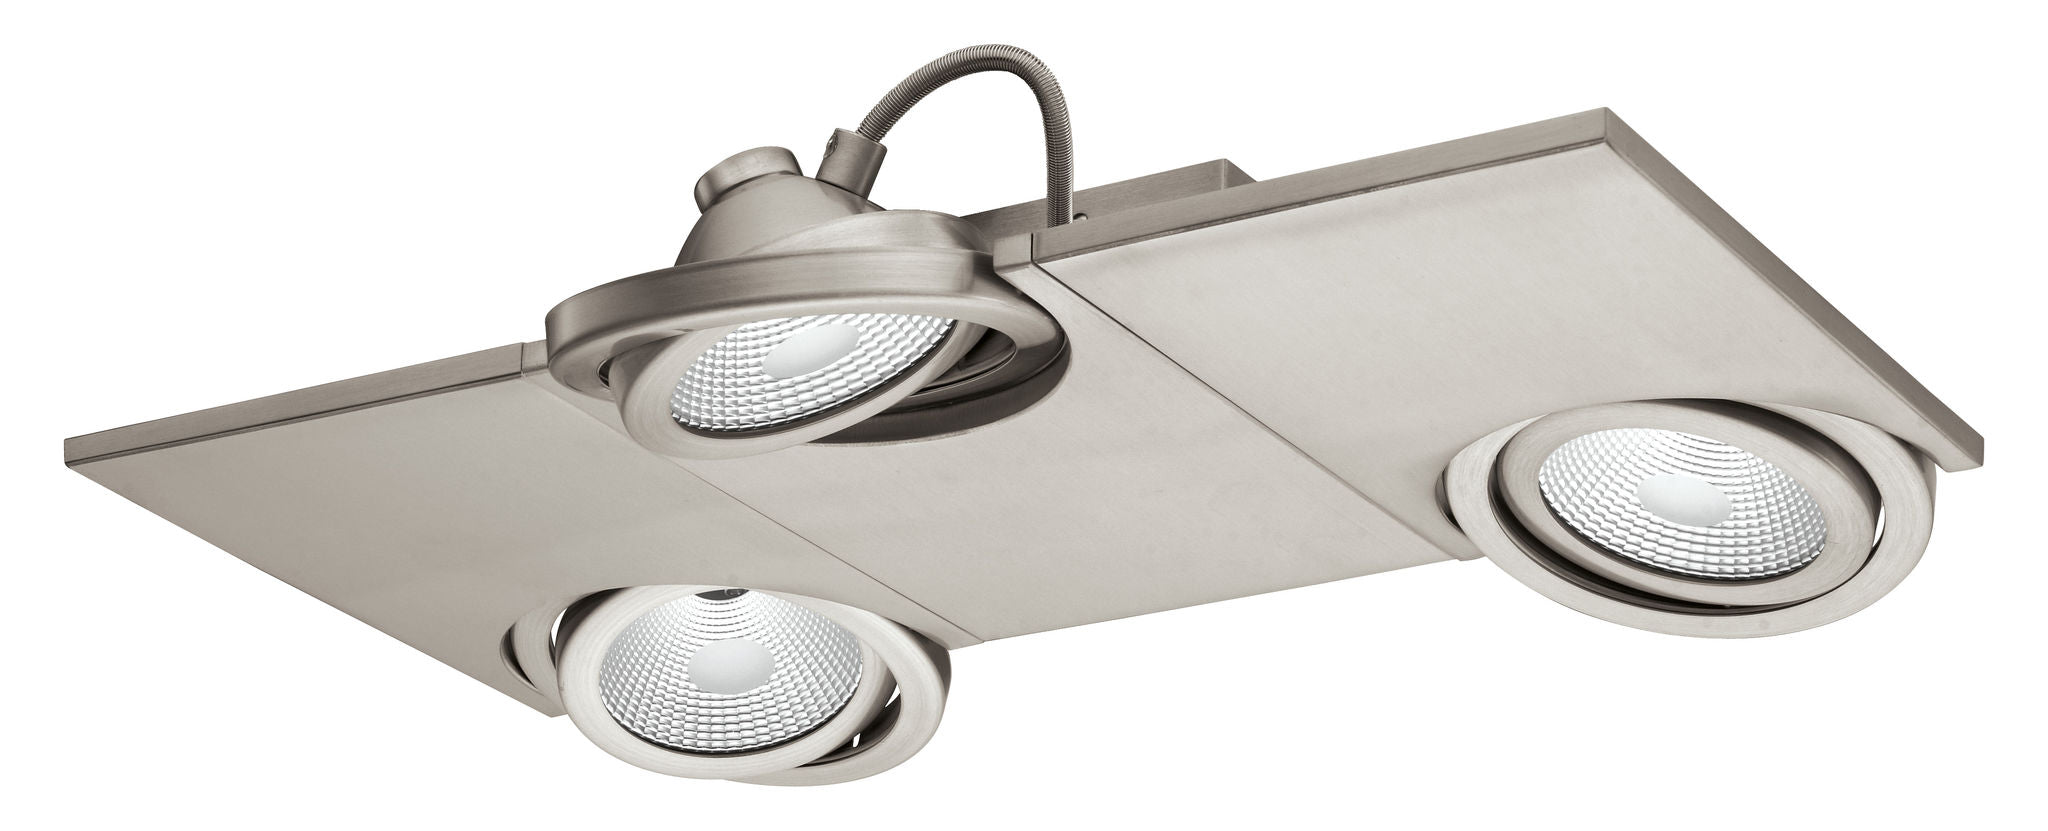 Brea Spotlight Stainless steel INTEGRATED LED - 39249A | EGLO